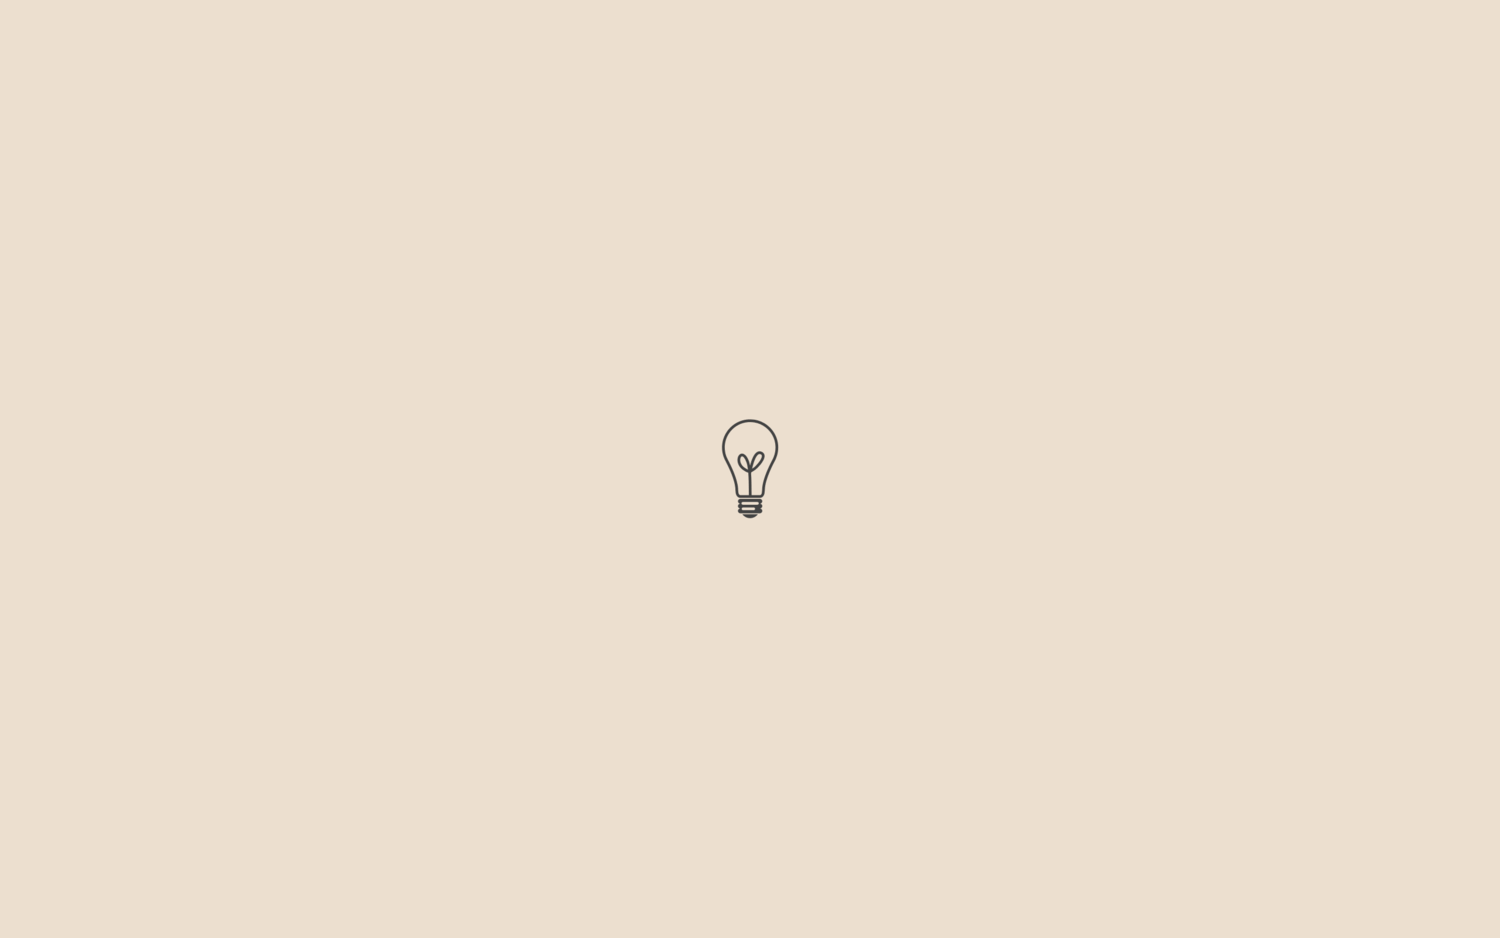 A small light bulb is shown on the wall - Minimalist, simple, computer